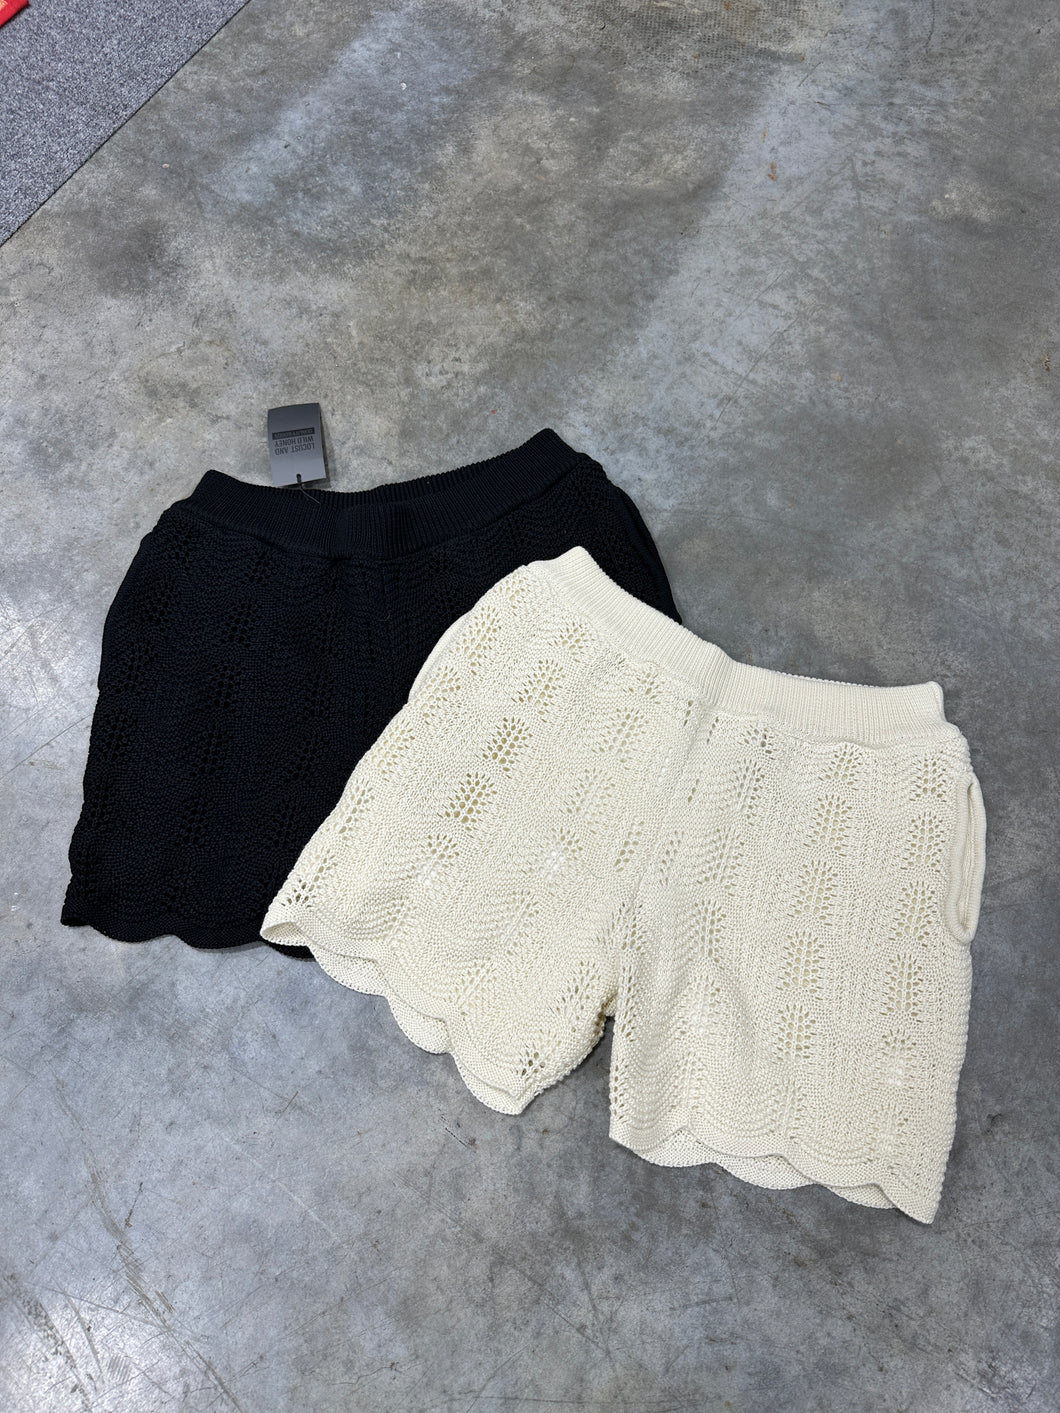 LWH Knitted Shorts Sz M (black and white)